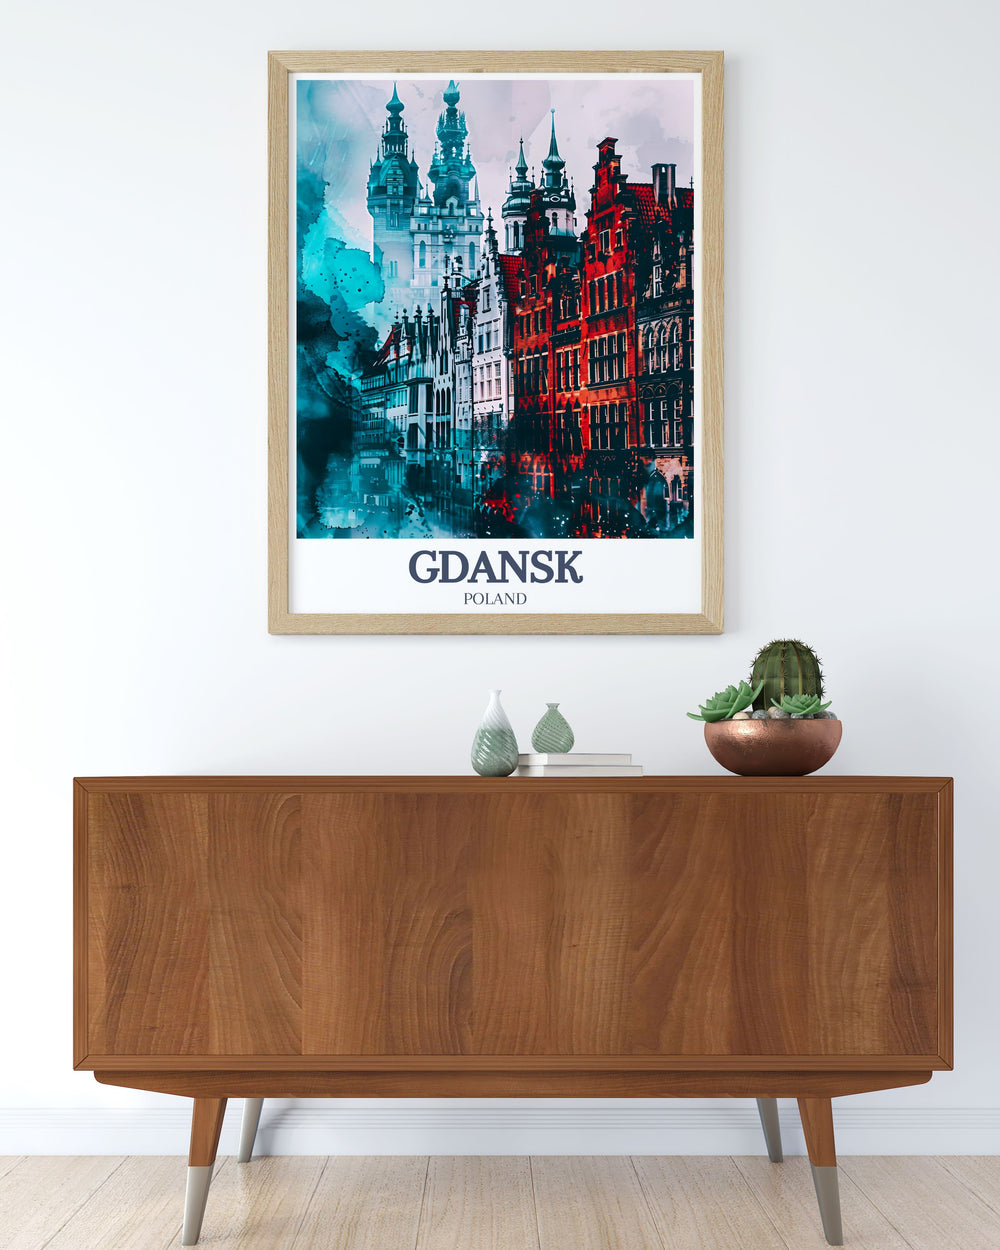 Elegant Gdansk Old Town, St. Marys Church Travel Art Print showcasing the iconic architecture in intricate detail. A beautiful addition to any room, this city print enhances your Gdansk decor with timeless black and white design and stunning artistry.